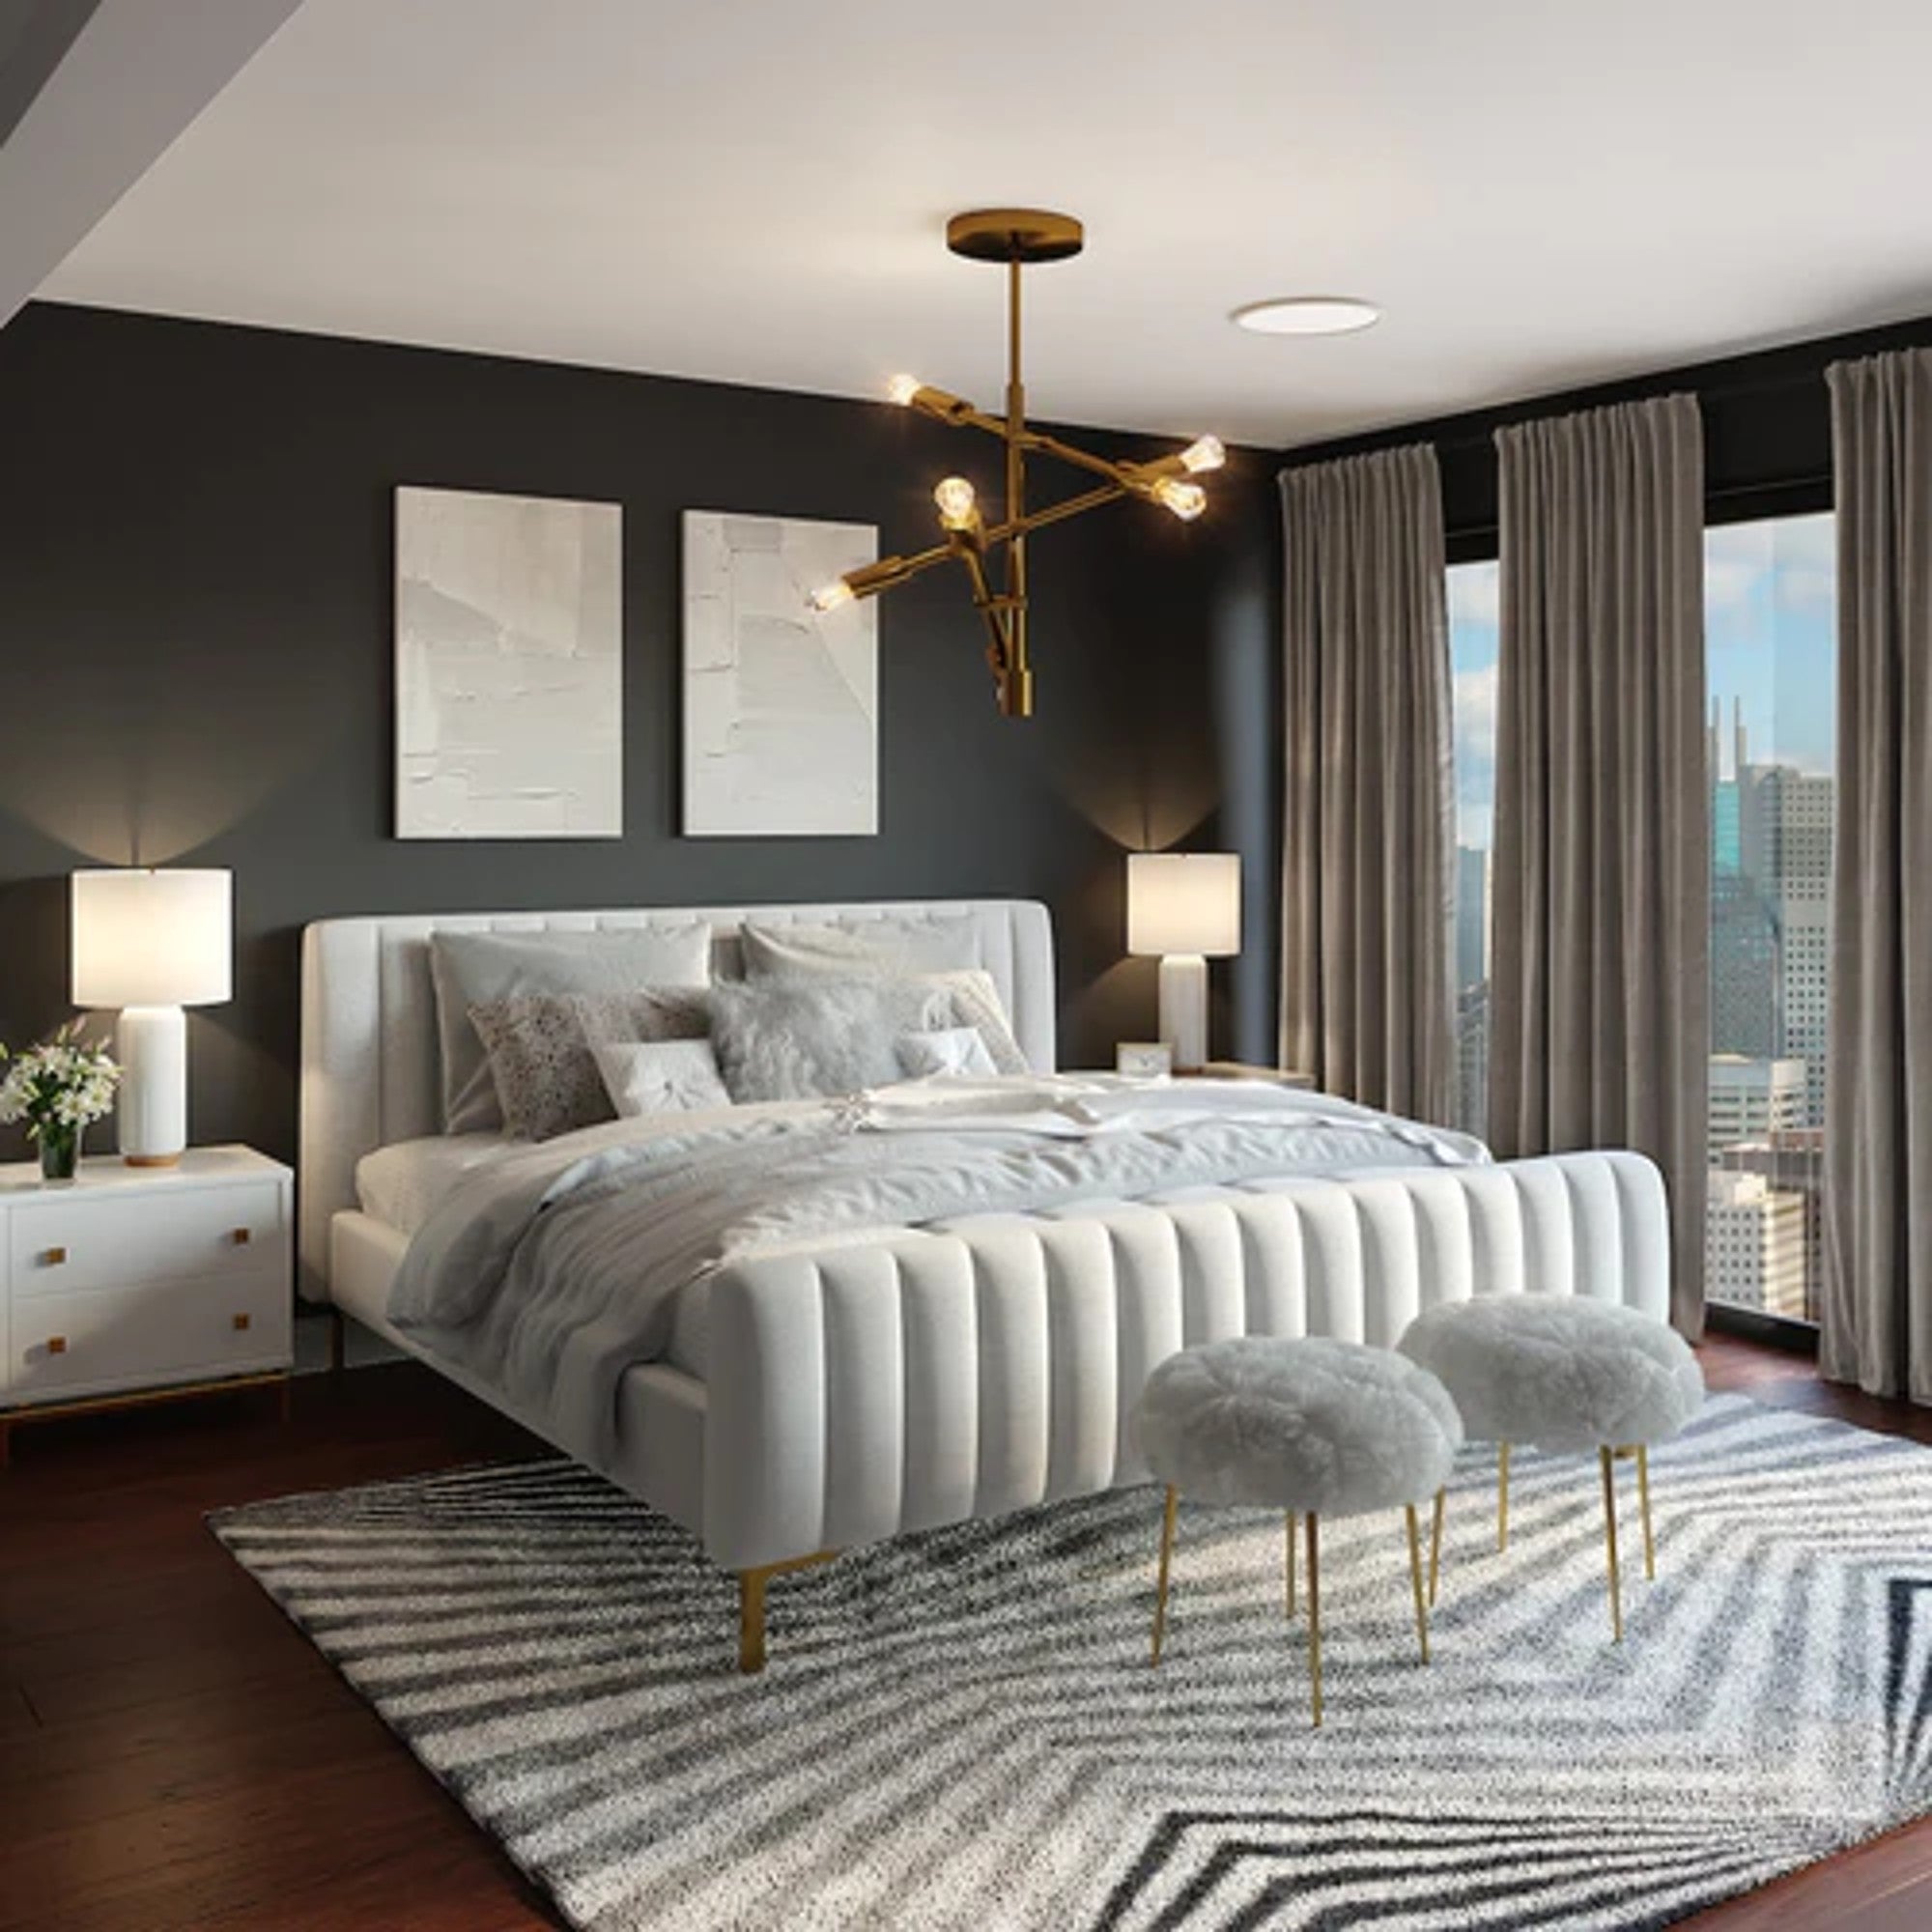 How to Redecorate a Bedroom